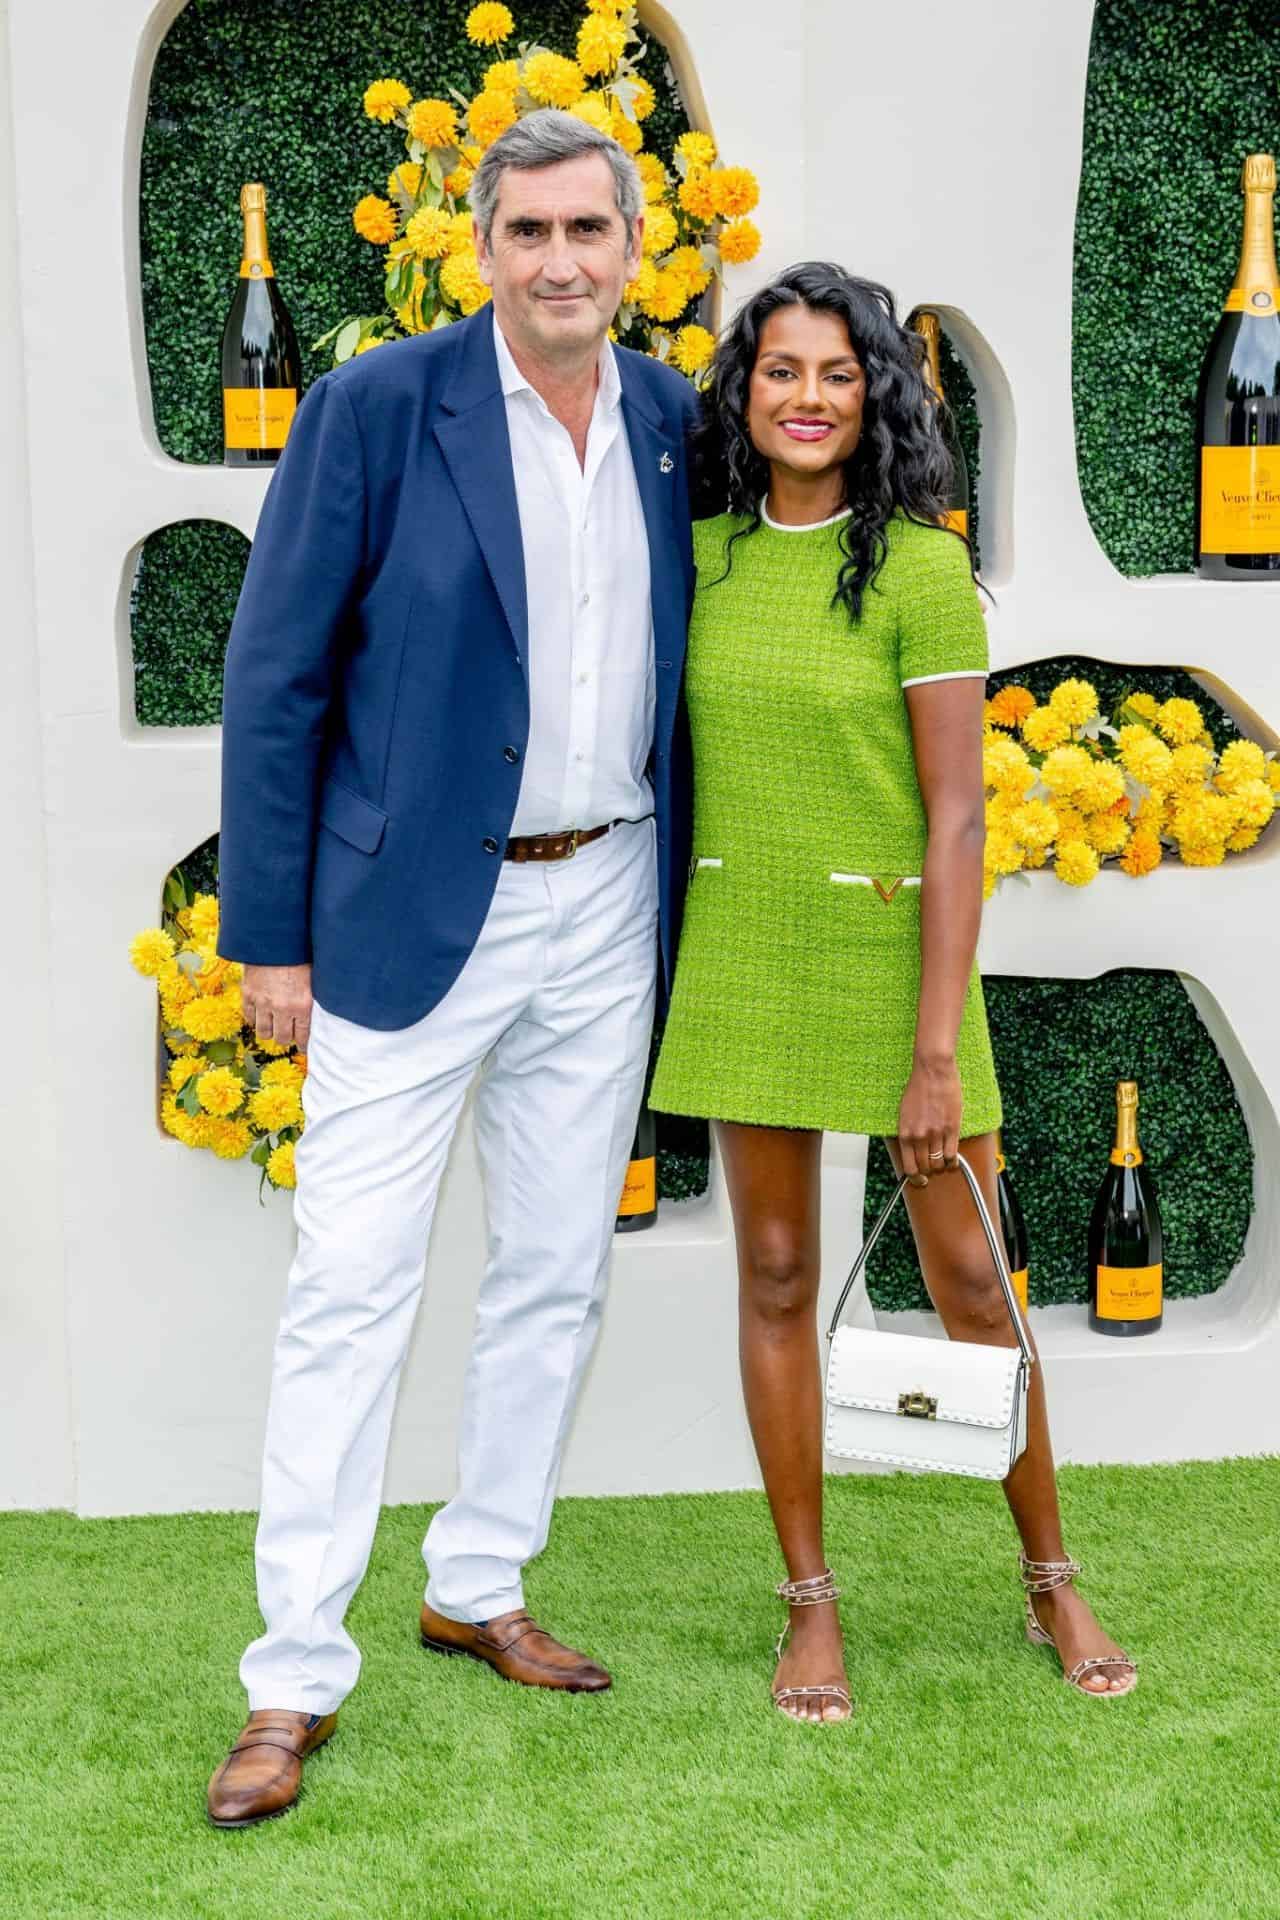 Simone Ashley Stuns in Green Tweed Valentino Dress at VC Polo Classic 2023